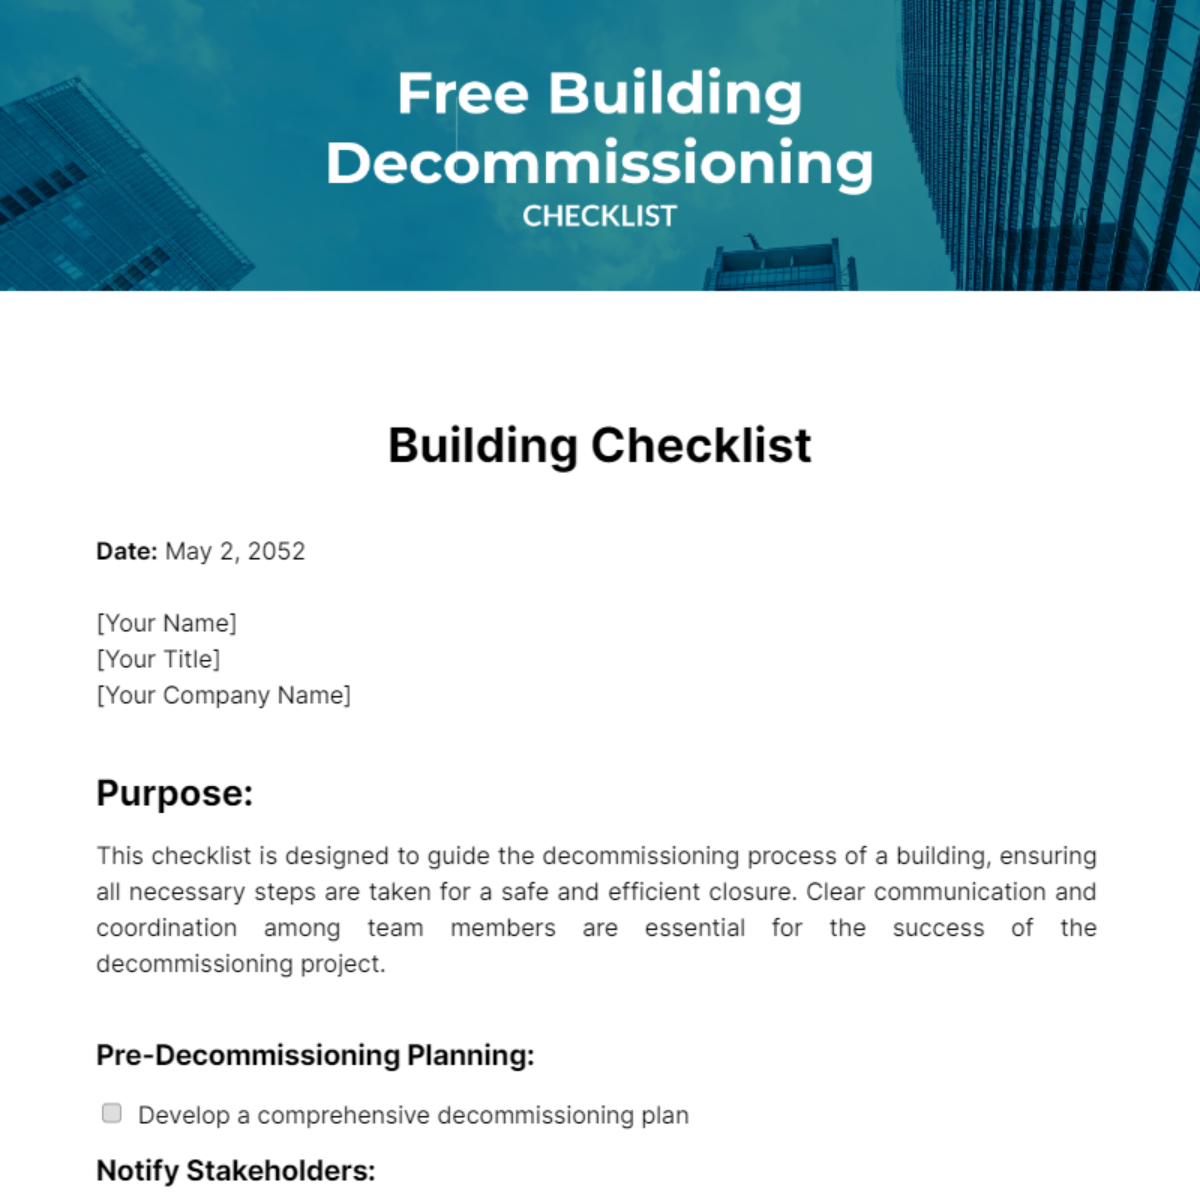 Building Decommissioning Checklist Template